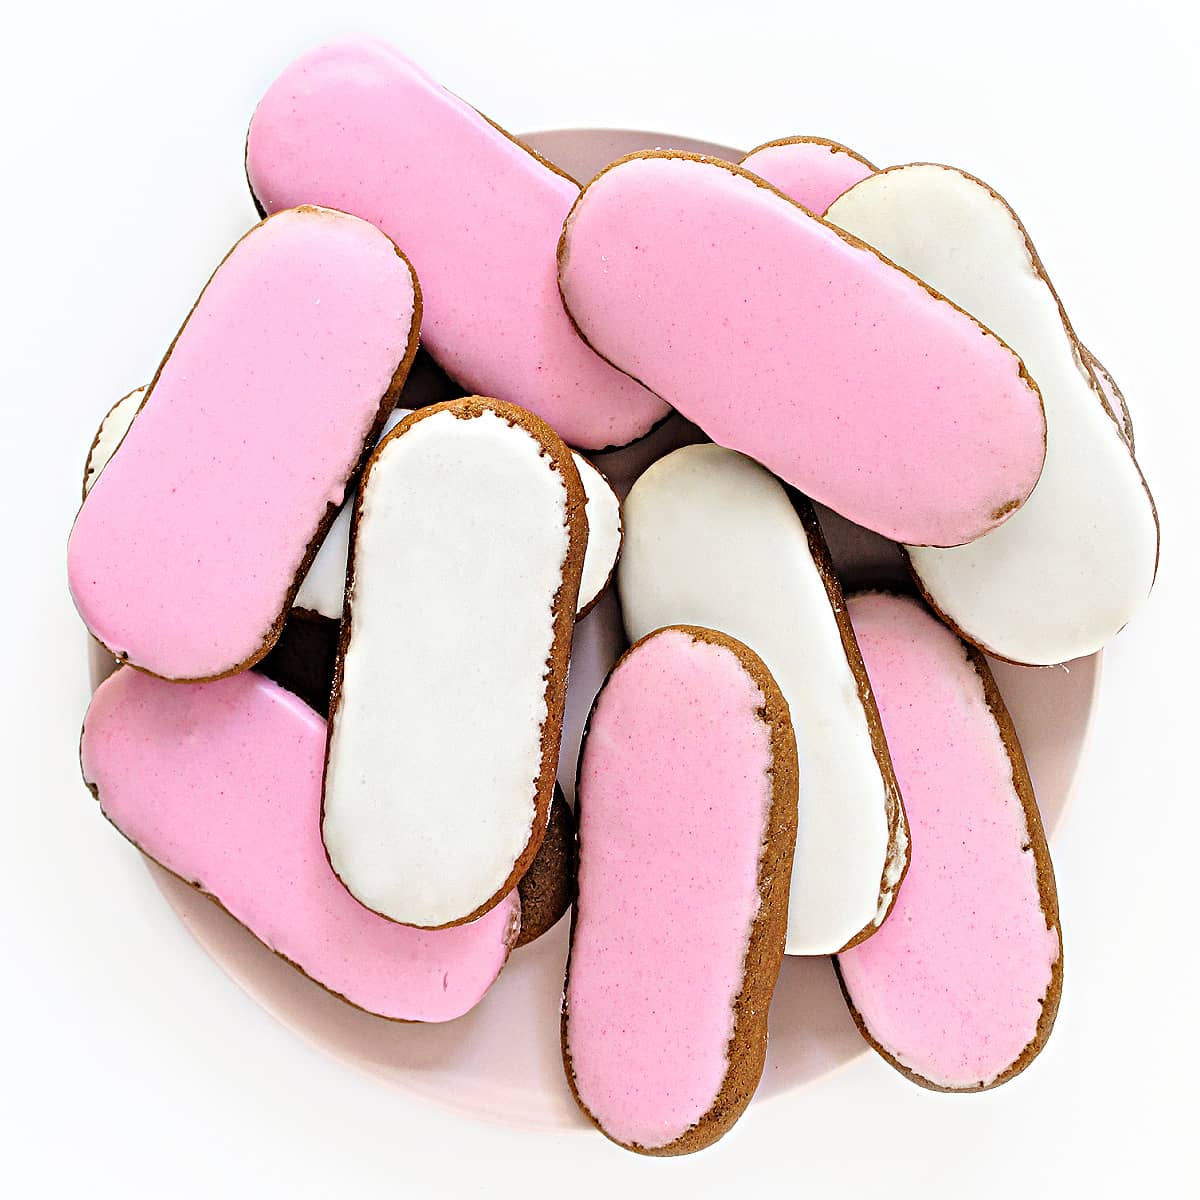 Overhead image of oval pink and white iced cookies on a serving plate.